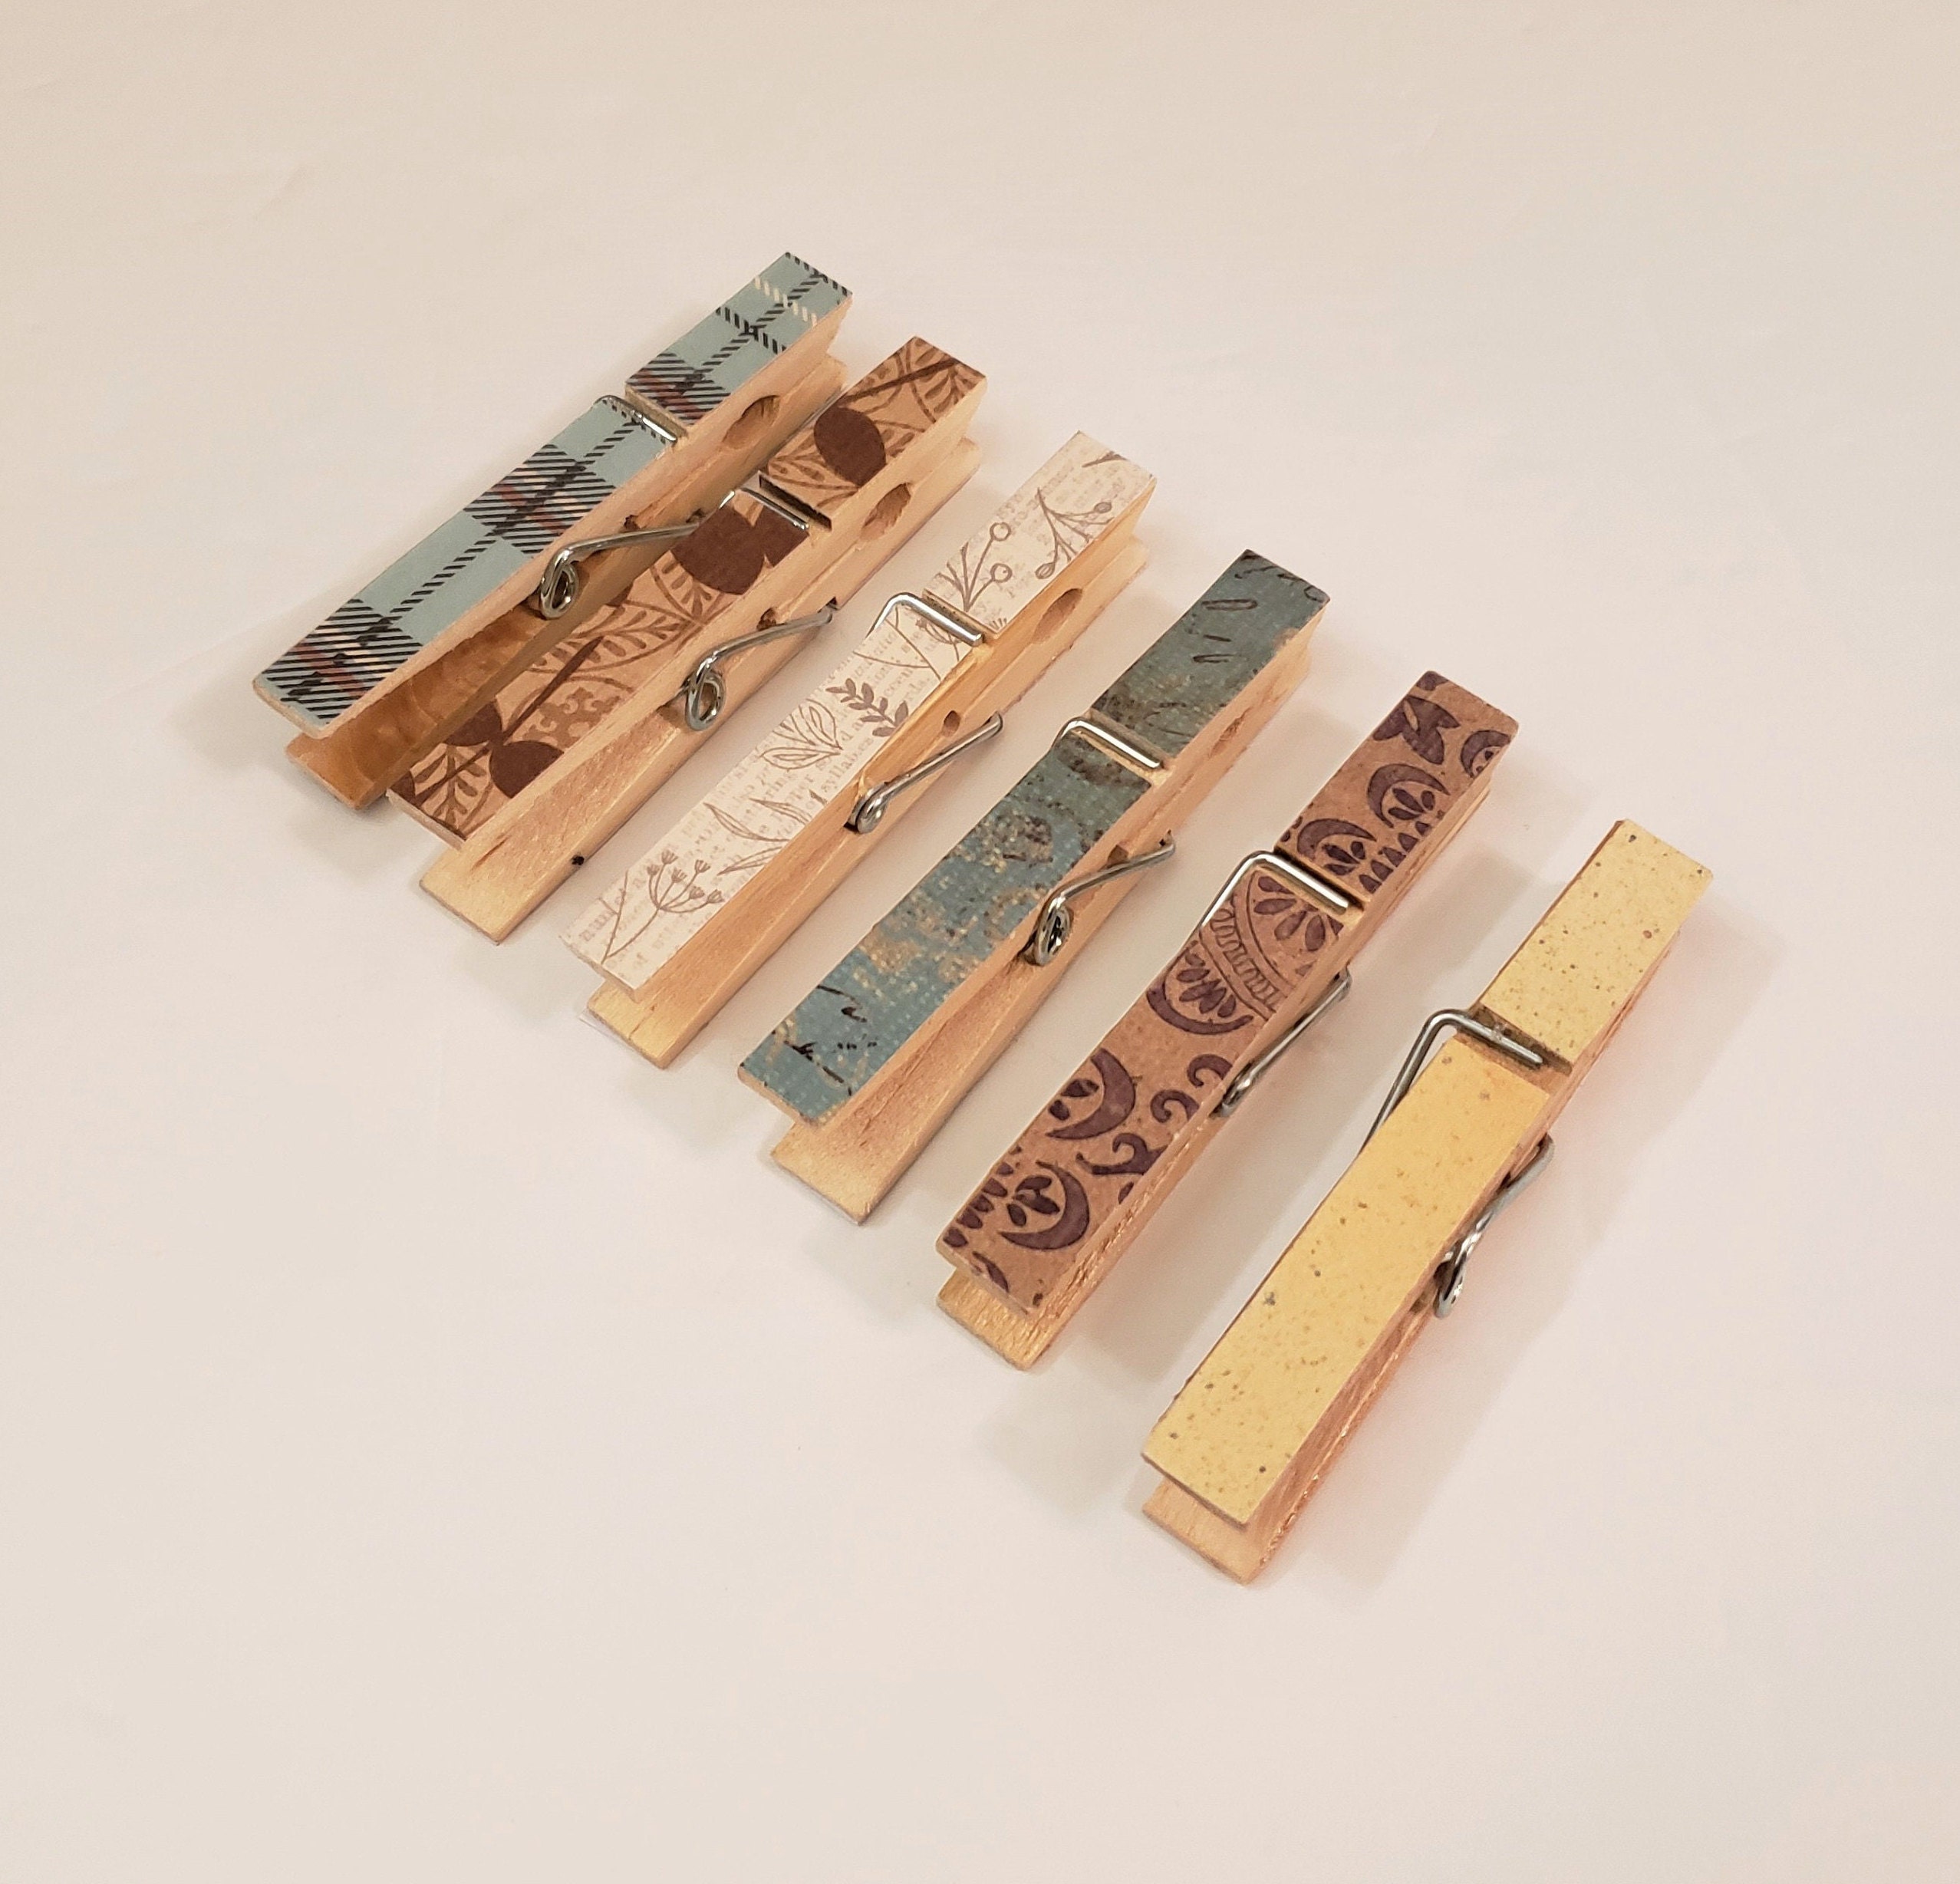 NEW LISTING Vintage Clothespins, Tiny Clothespins, Plastic Embellished  Clothespins, Craft Supply, Mixed Media 